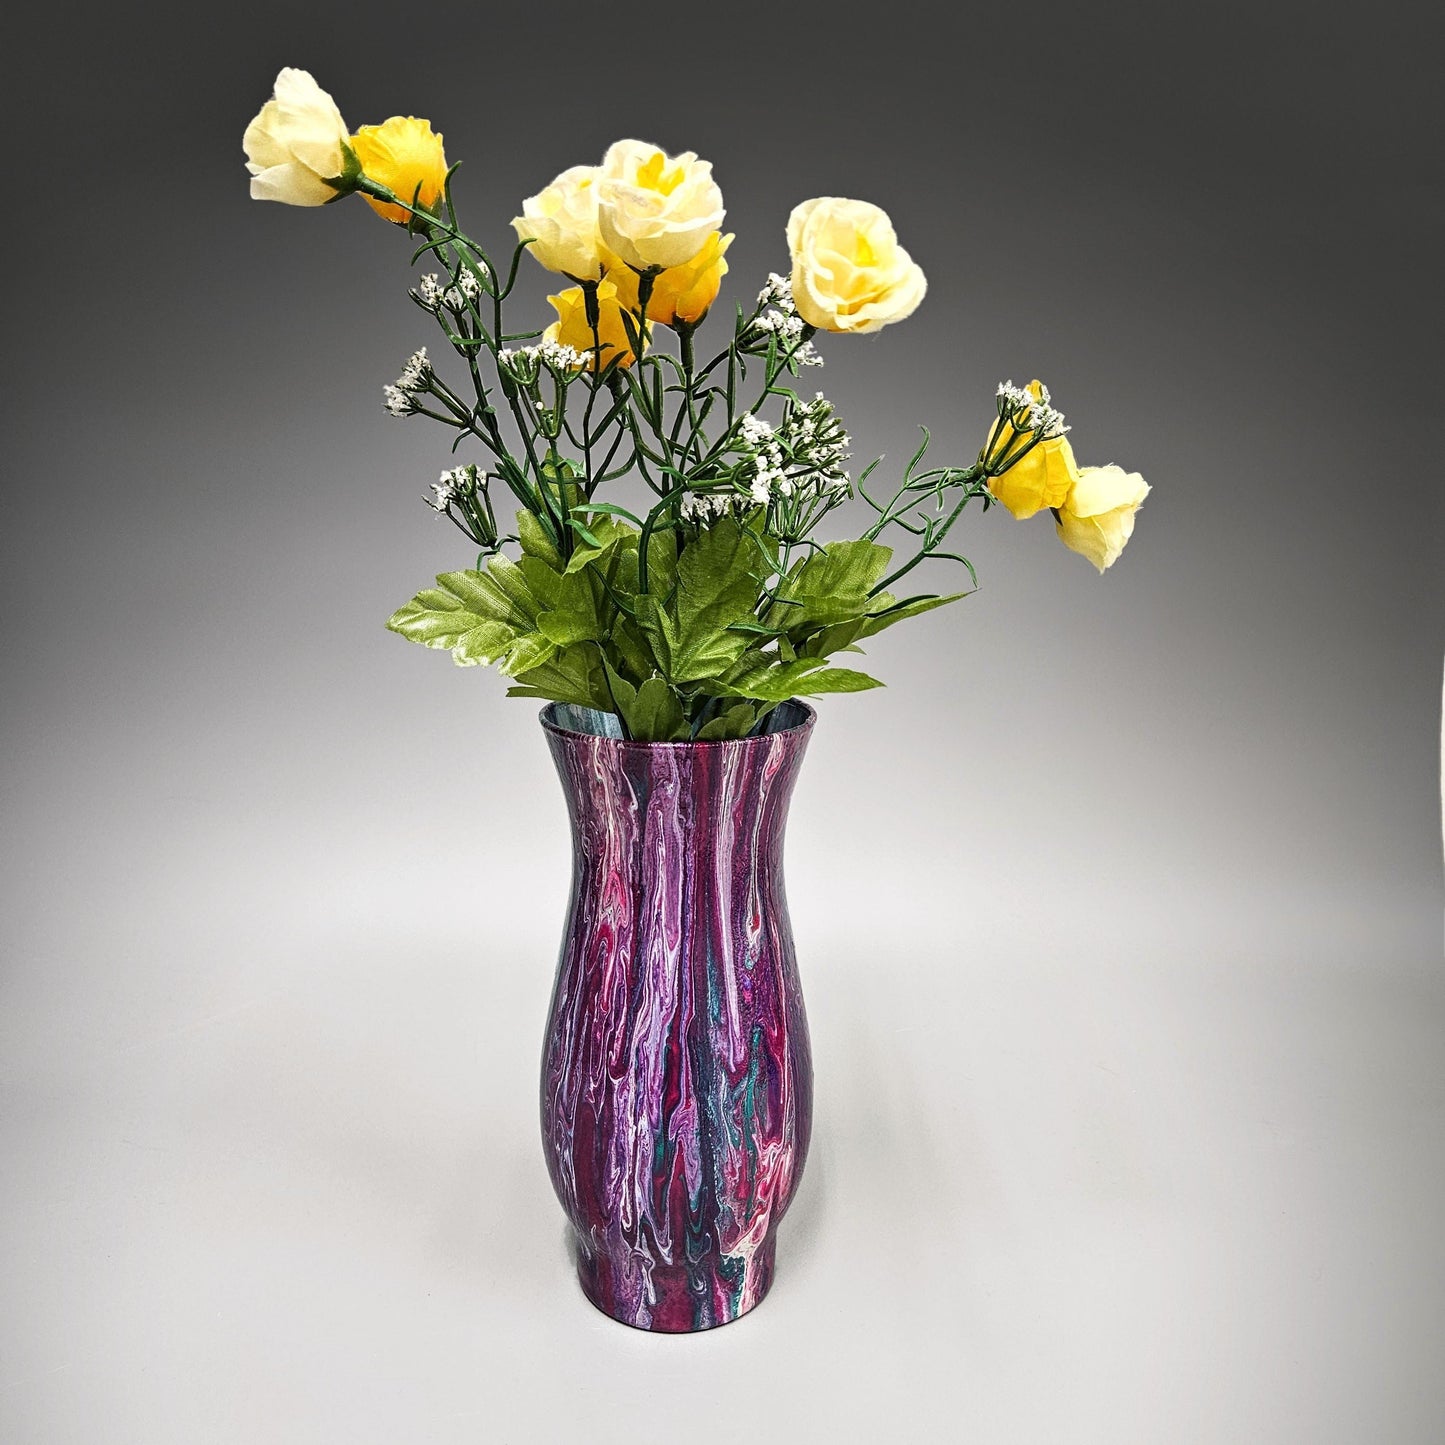 Glass Art Painted Vase in Fuchsia Teal | Acrylic Pour Fluid Art Vase | Yellow Roses